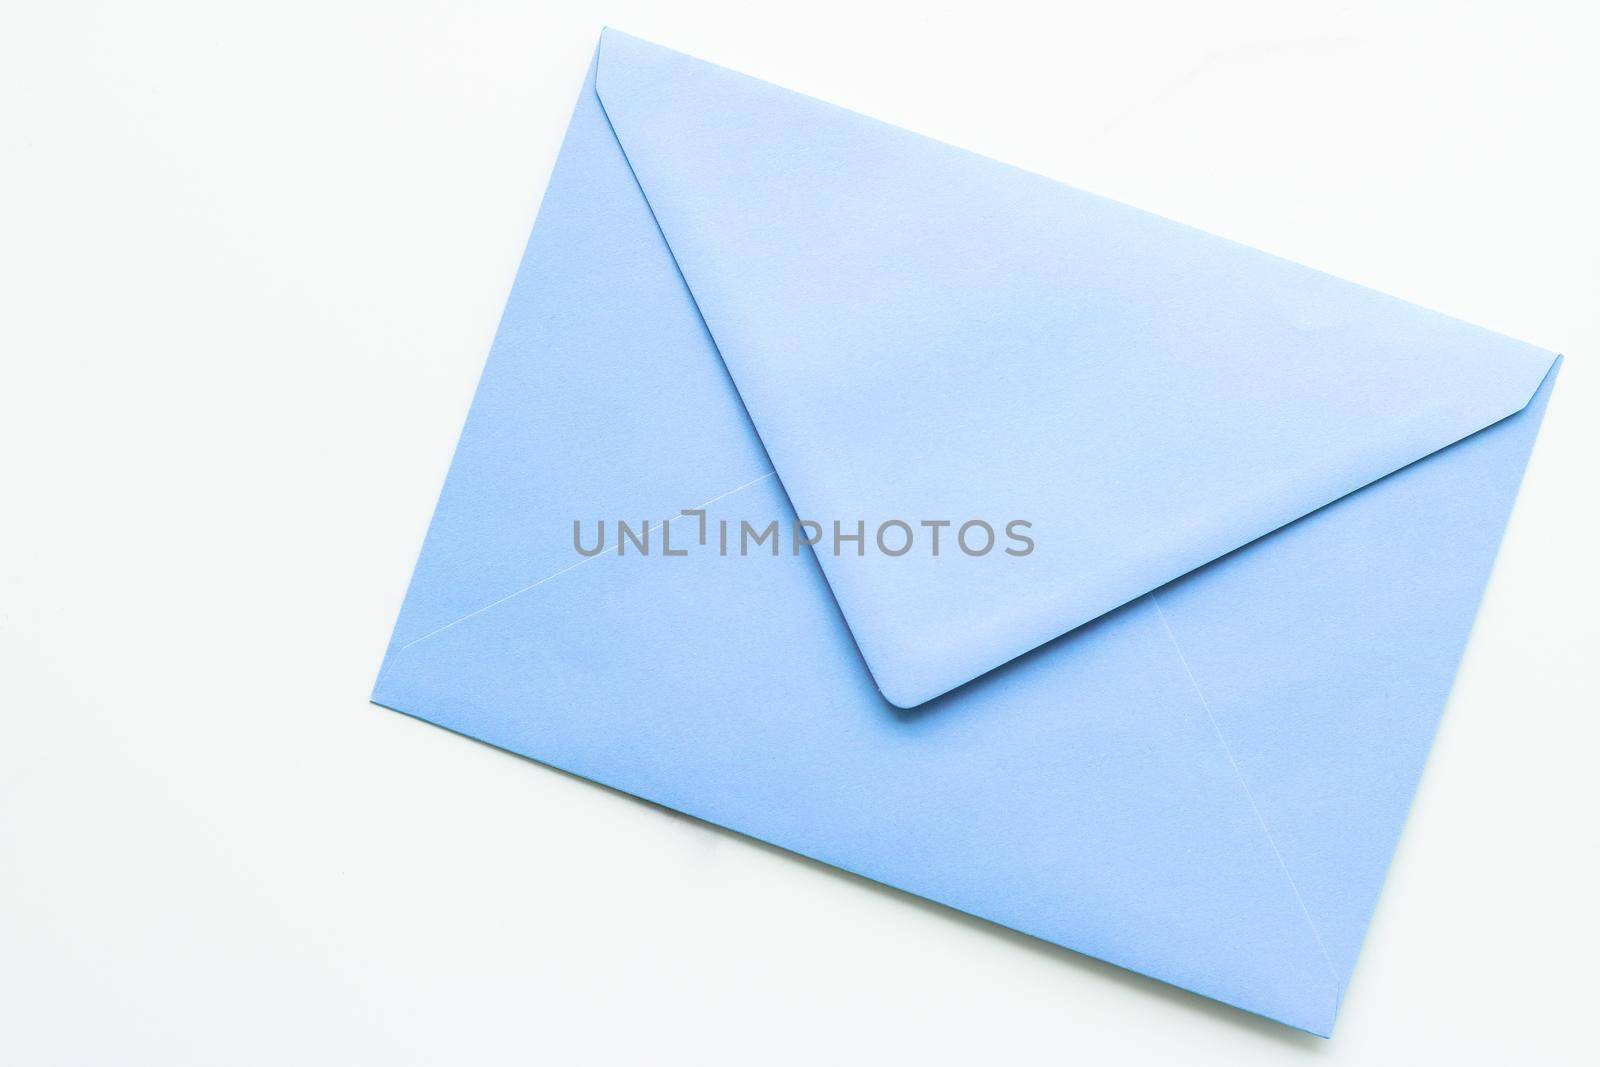 Blank paper envelopes on marble flatlay background, holiday mail letter or post card message design by Anneleven